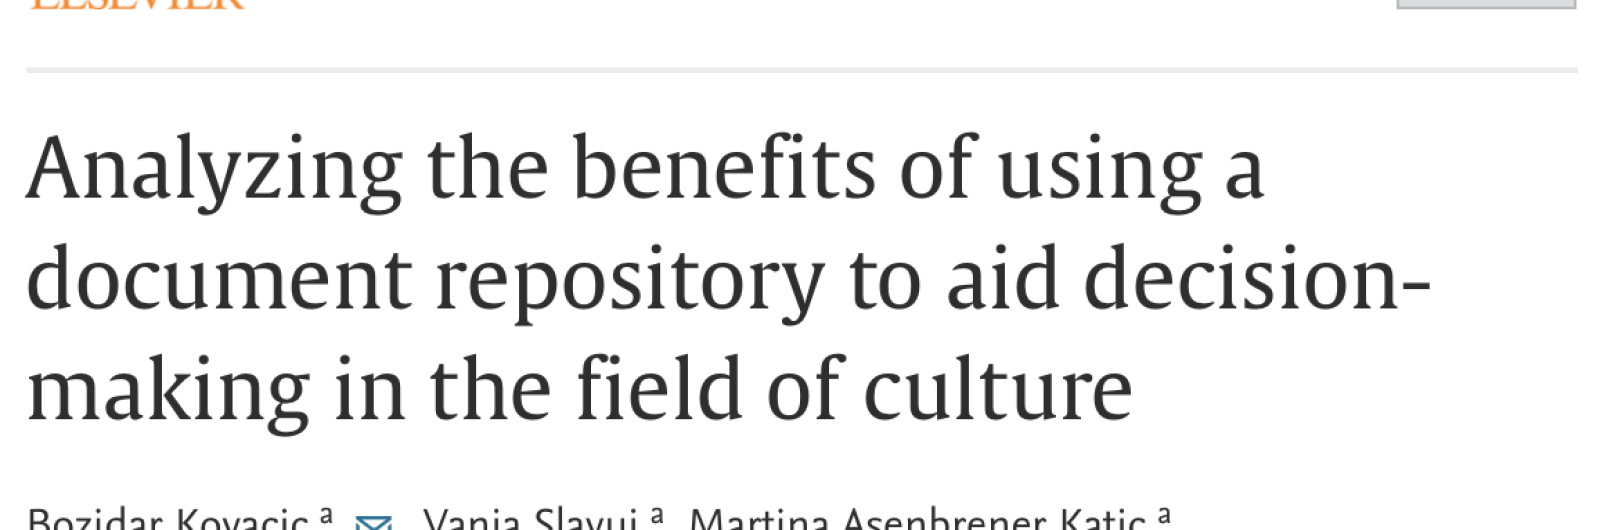 Publication Analyzing the benefits of using a document repository to aid decision-making in the field of culture